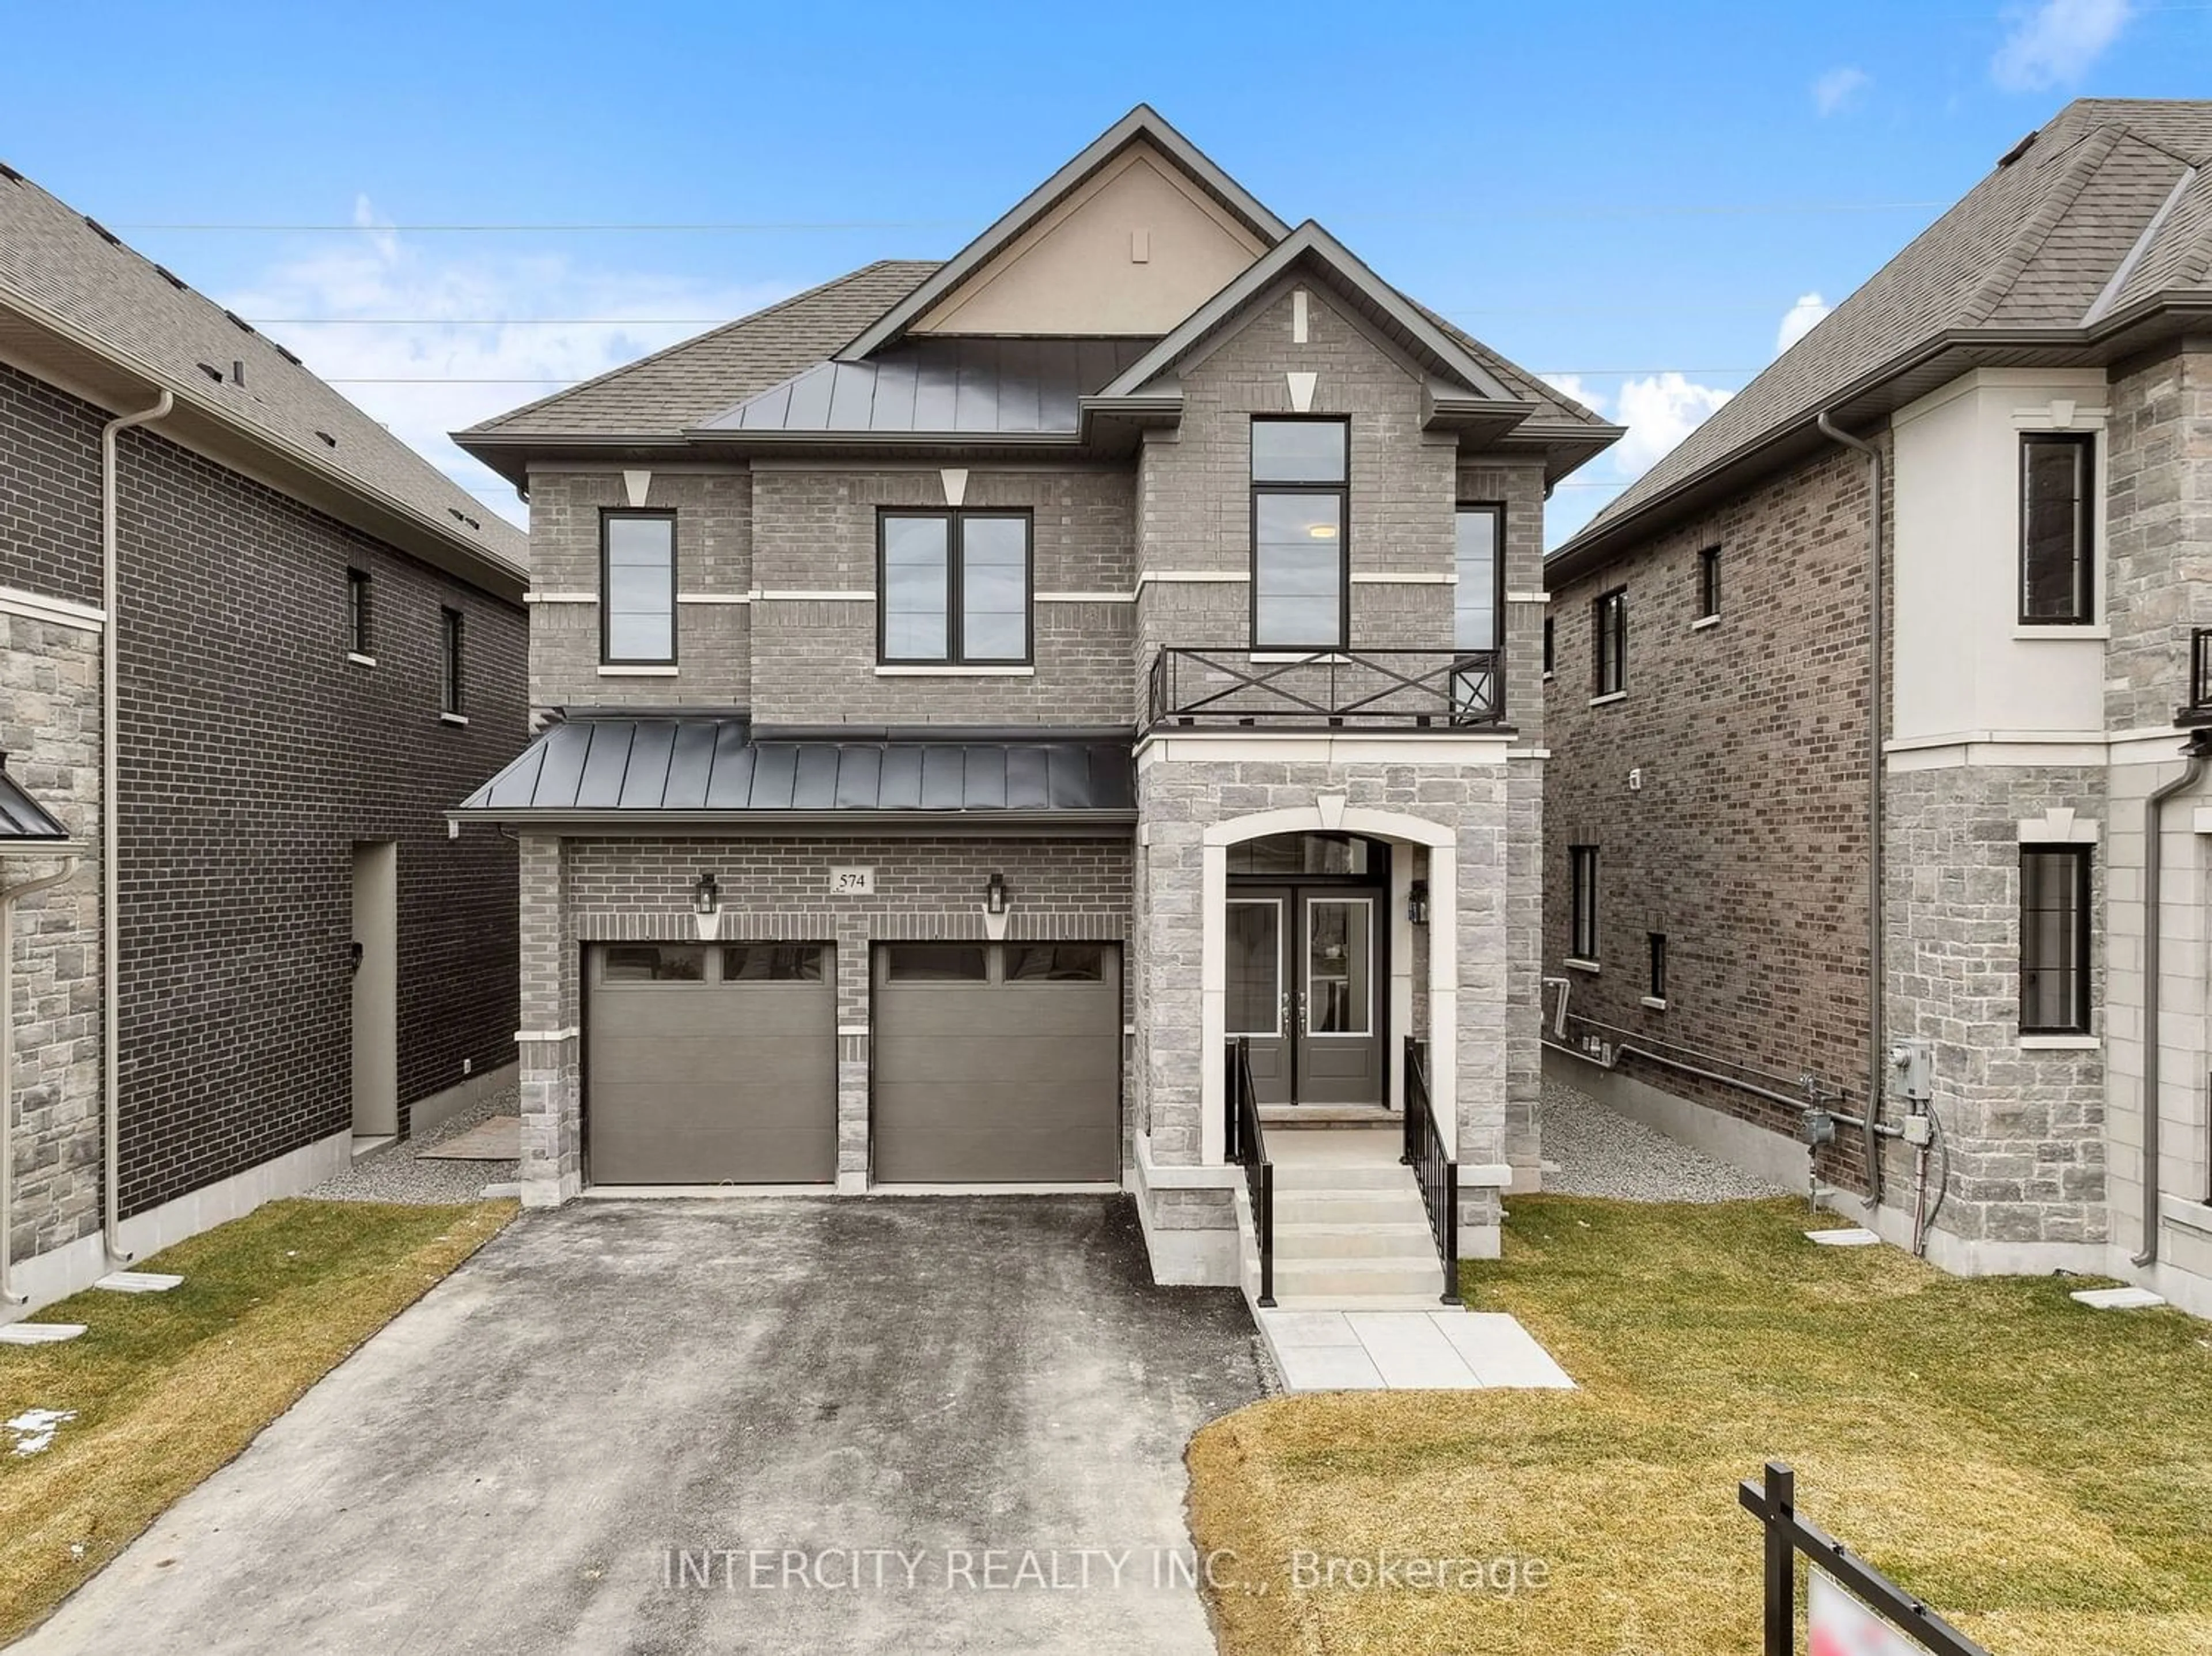 Home with brick exterior material for 574 Kleinburg Summit Way, Vaughan Ontario L4H 3N5